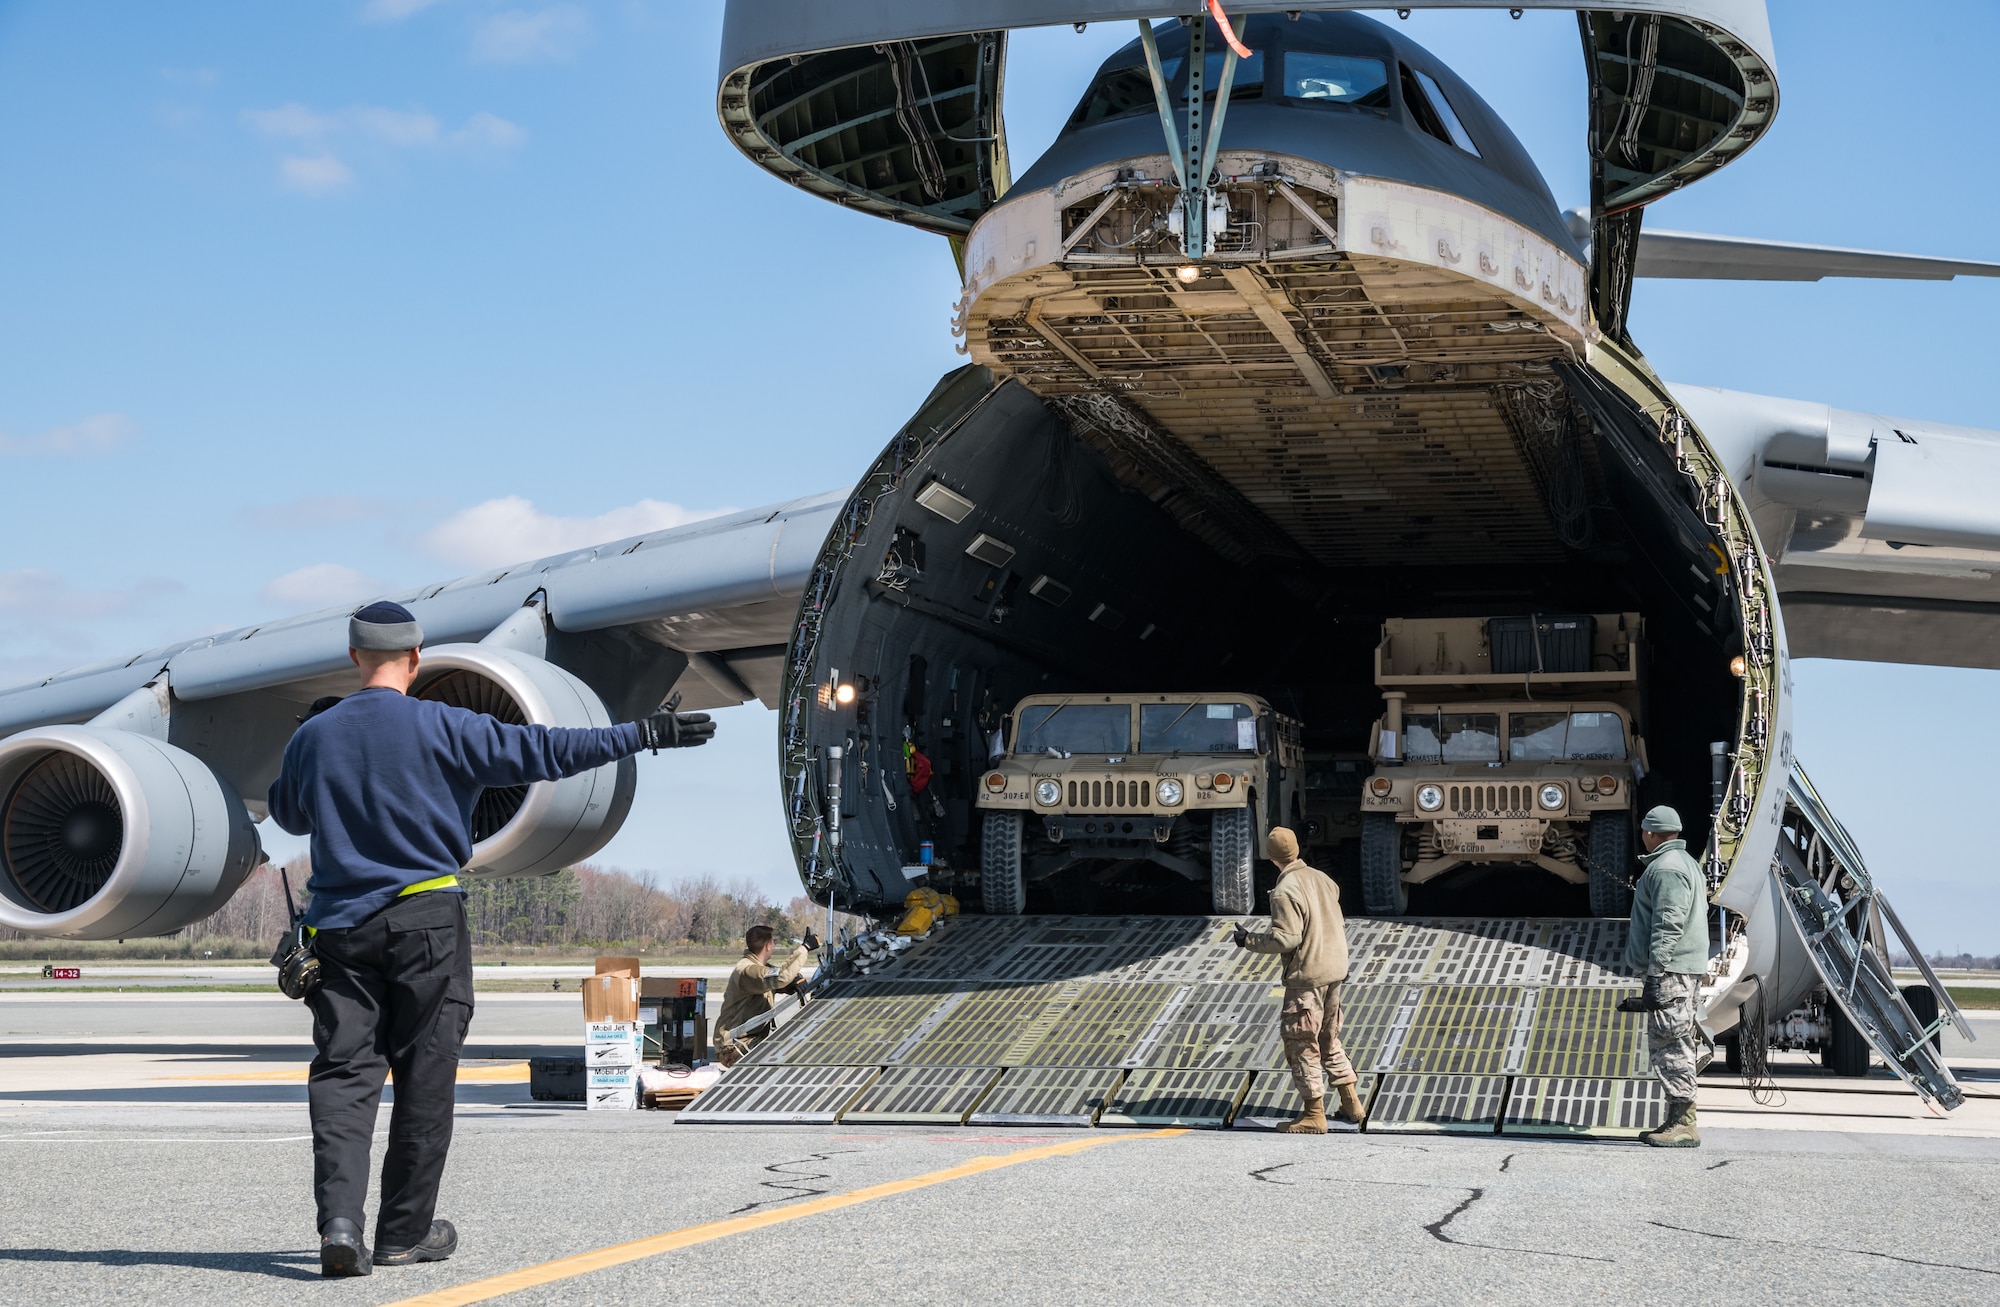 Dane Coward, left, 436th Aerial Port Squadron ramp supervisor, marshals a humvee down the forward loading ramp of a C-5M Super Galaxy March 26, 2020, at Dover Air Force Base, Delaware. Coward and his crew unloaded numerous Humvees off the Super Galaxy as required airlift operations continued during the evolving COVID-19 pandemic (U.S. Air Force photo by Roland Balik)